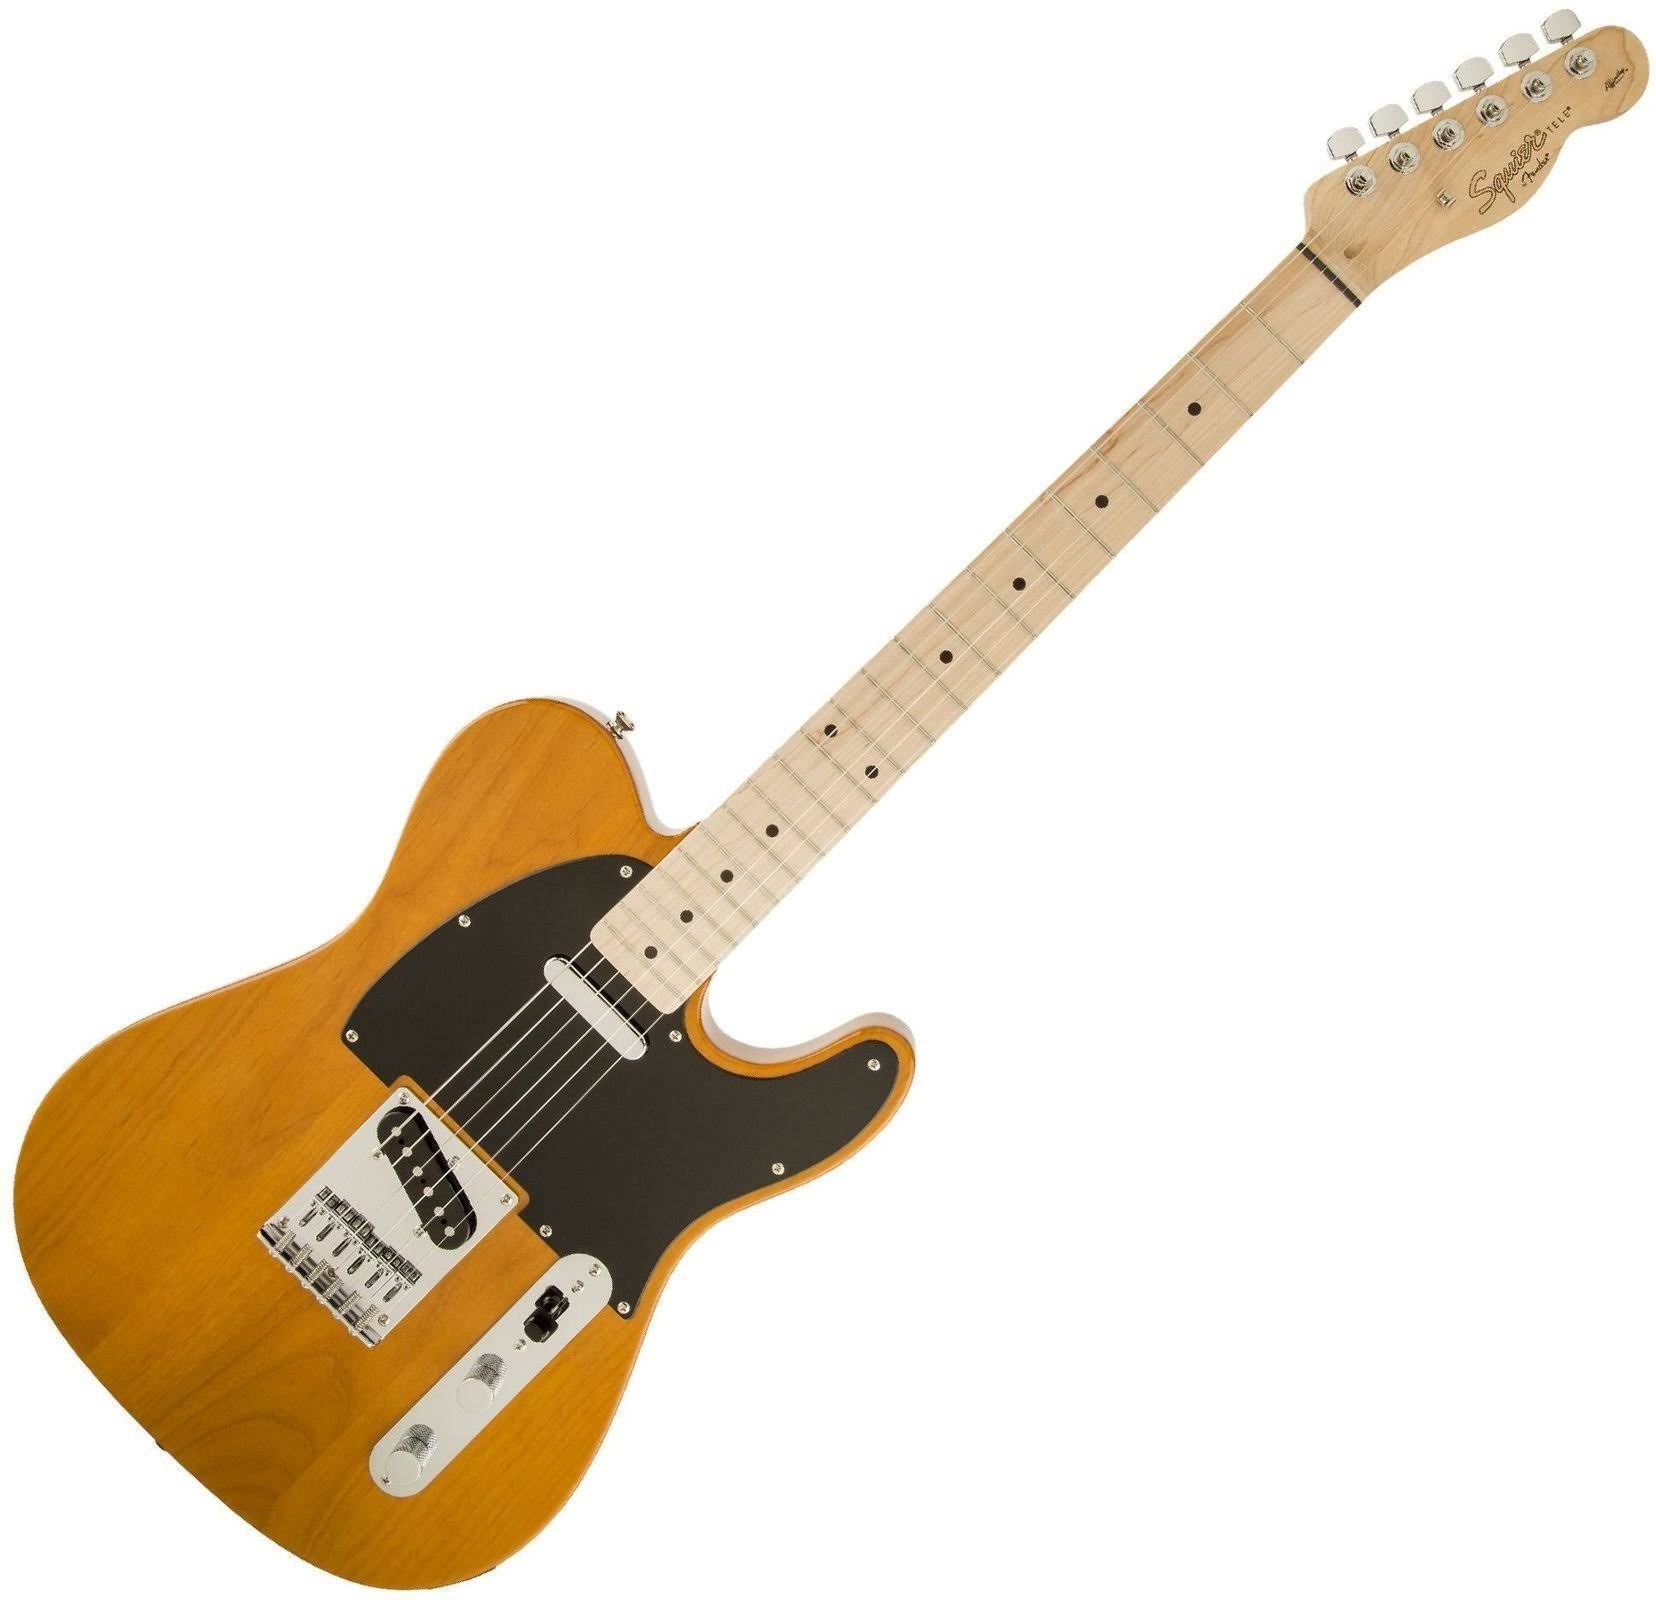 Fender Squier Affinity Telecaster Electric Guitar - Maple Fingerboard, Butterscotch Blonde